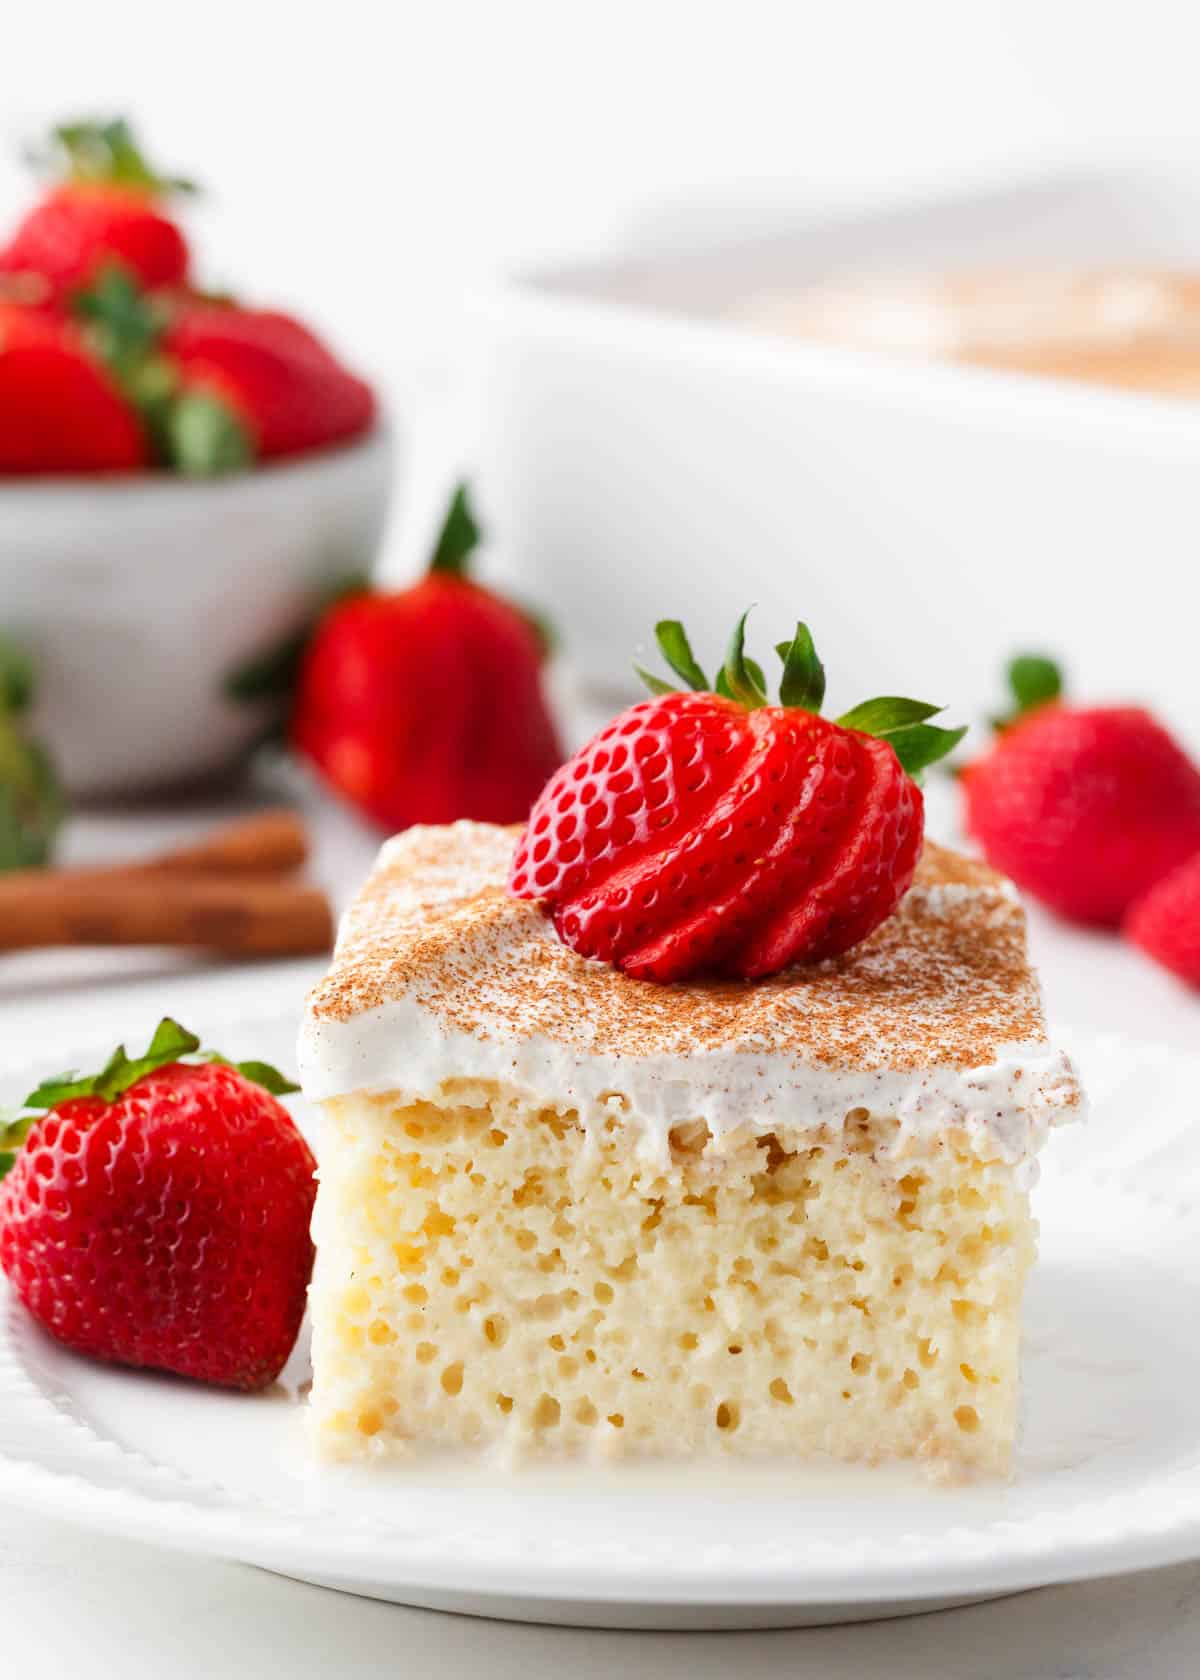 Slice of tres leches cake on a plate with a strawberry on top.